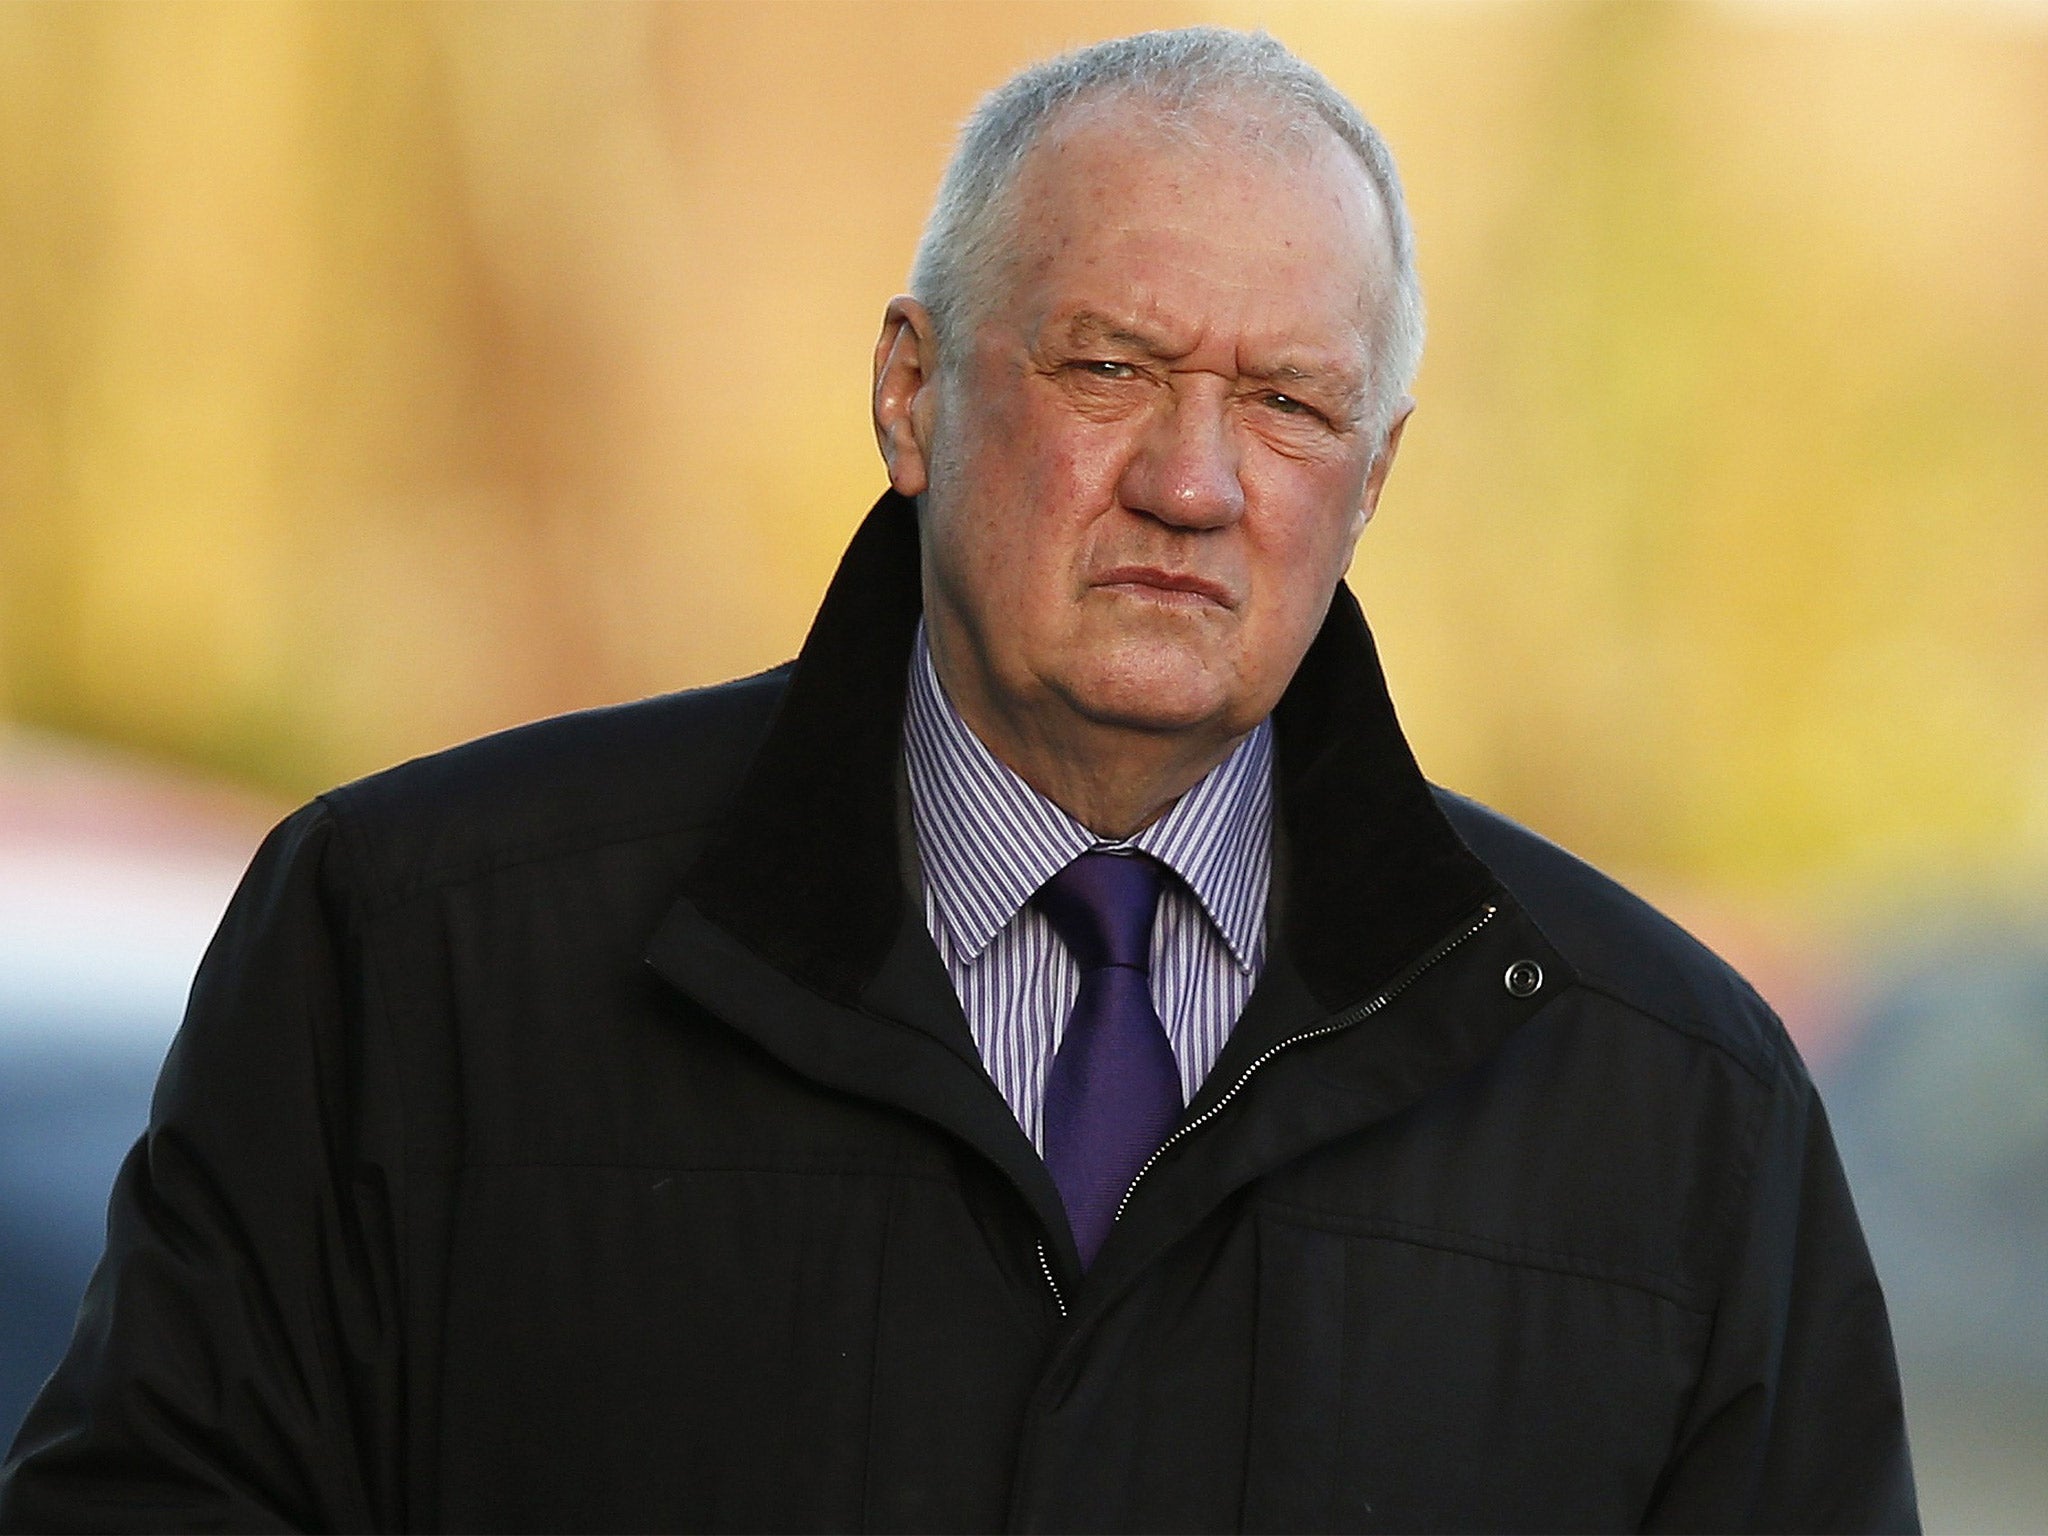 David Duckenfield, former Chief Super-intendent of South Yorkshire Police and the Hillsborough match commander, arrives to give evidence in Warrington on Tuesday